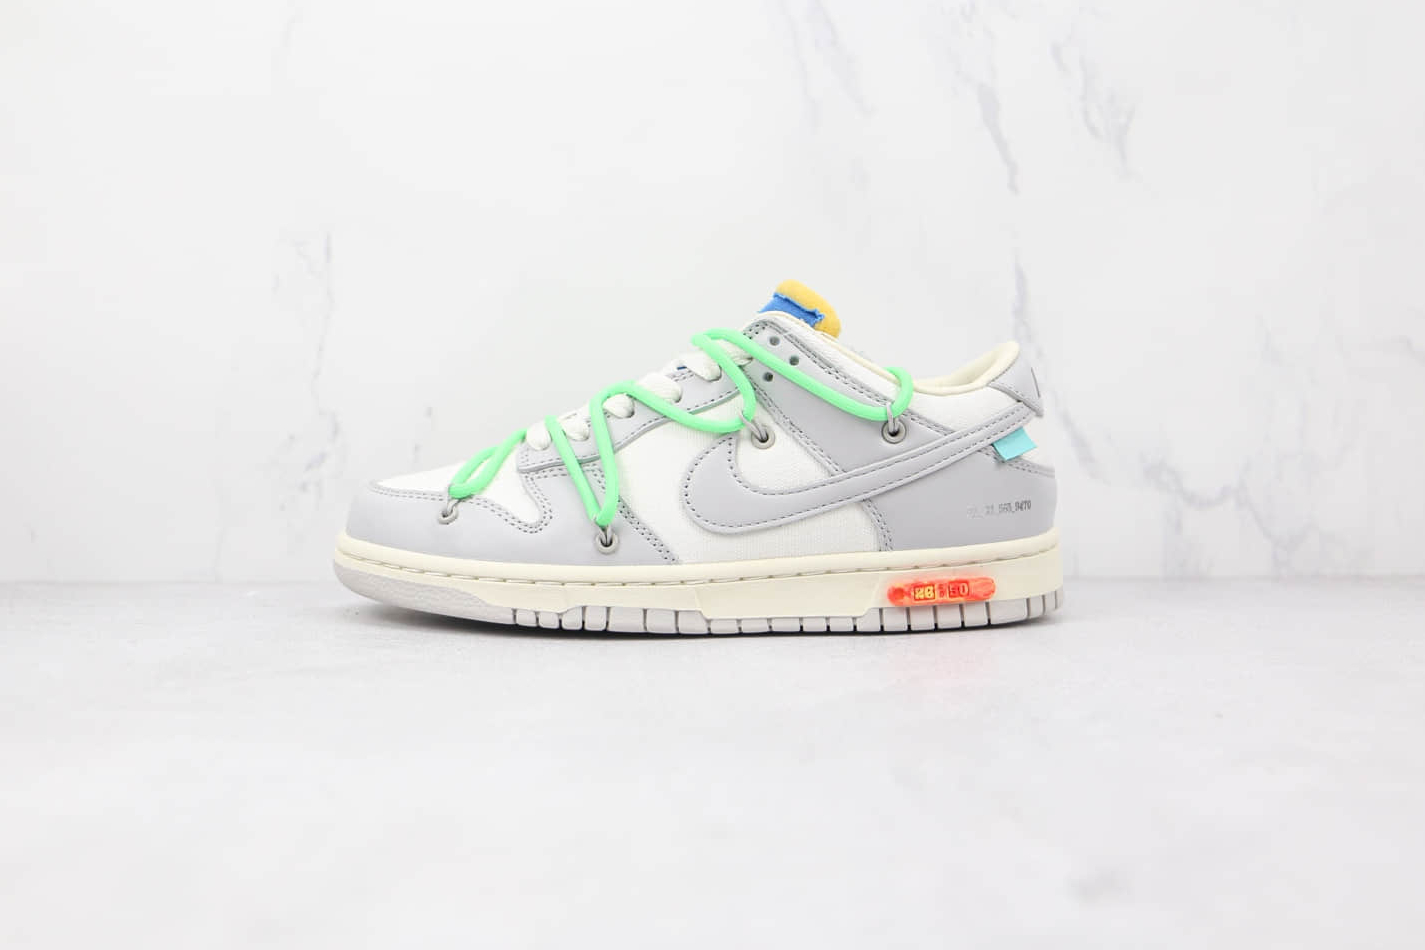 Nike Off-White x Dunk Low 'Lot 26 of 50' DM1602-116 - Limited Edition Sneakers